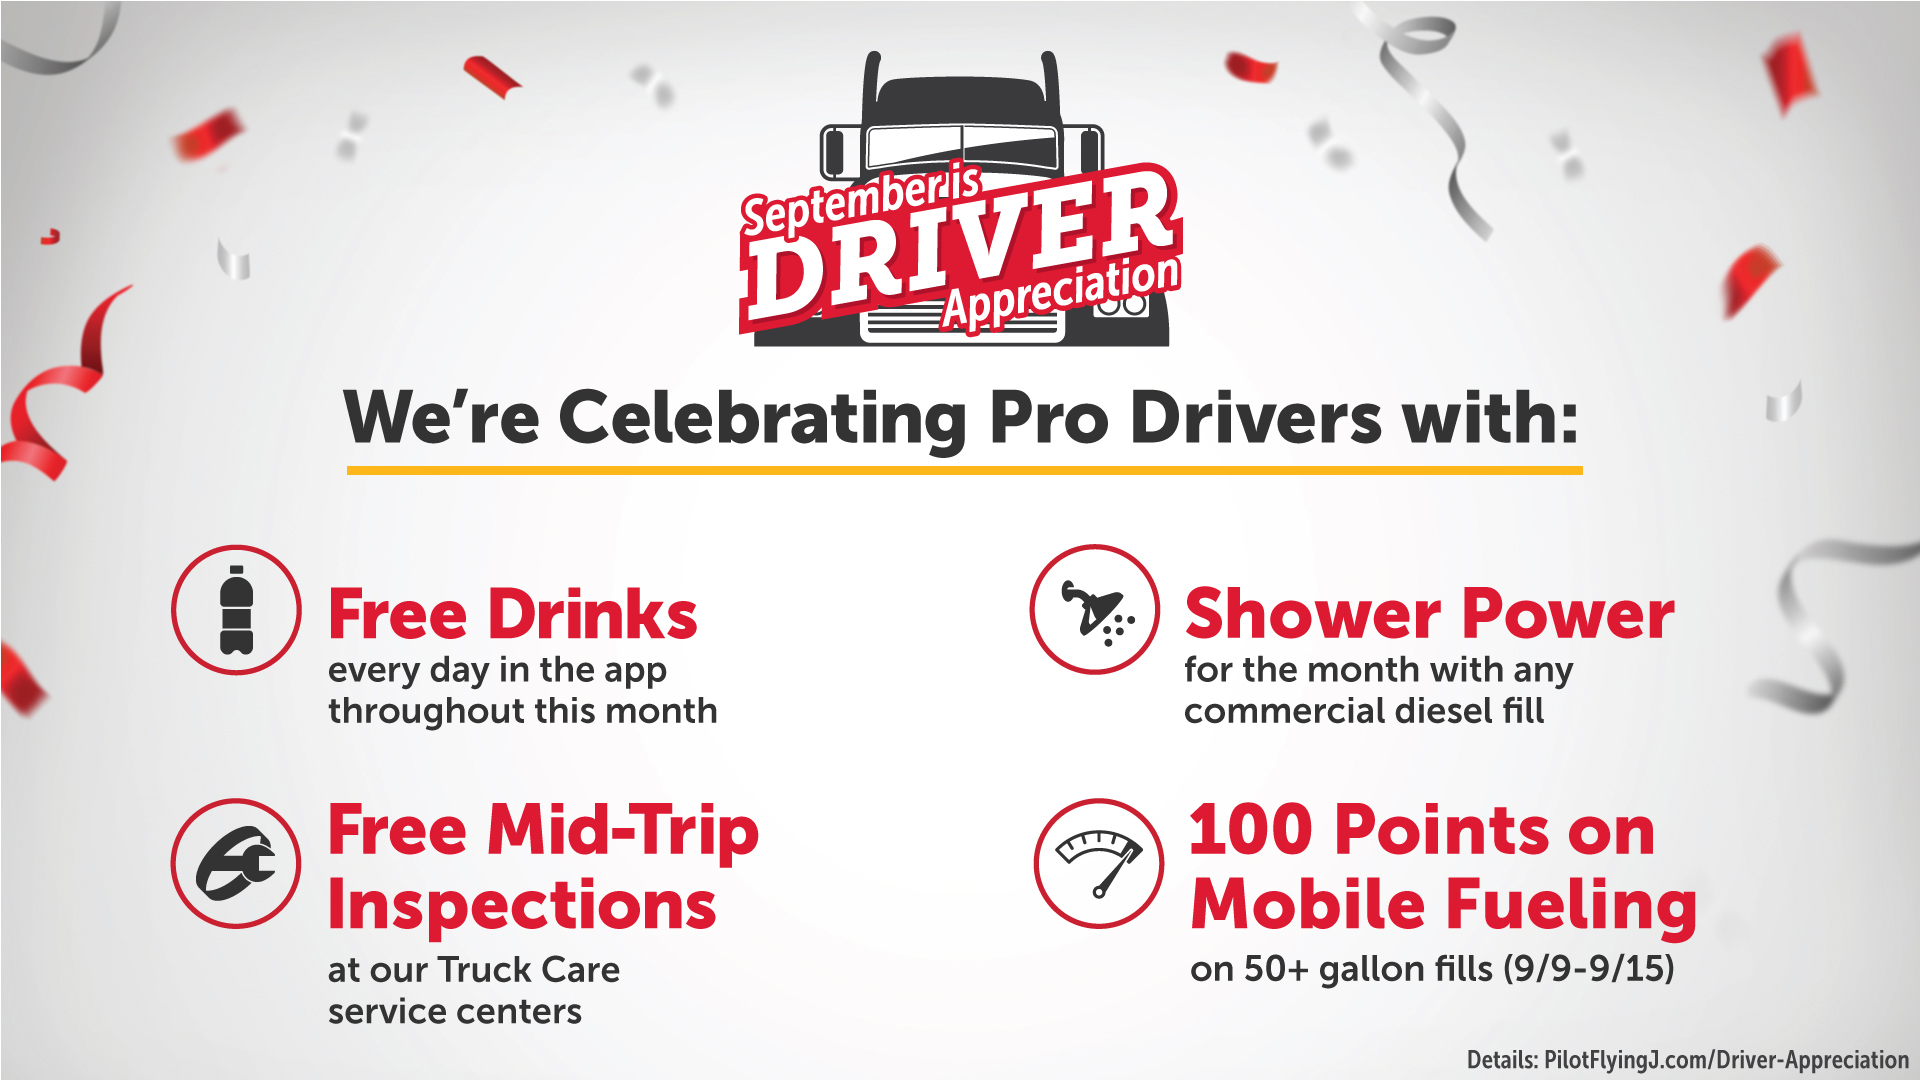 Download the Pilot Flying J app and celebrate pro drivers in September with offers for free drinks, shower power, Truck Care mid-trip inspection and 100 points for mobile fueling.